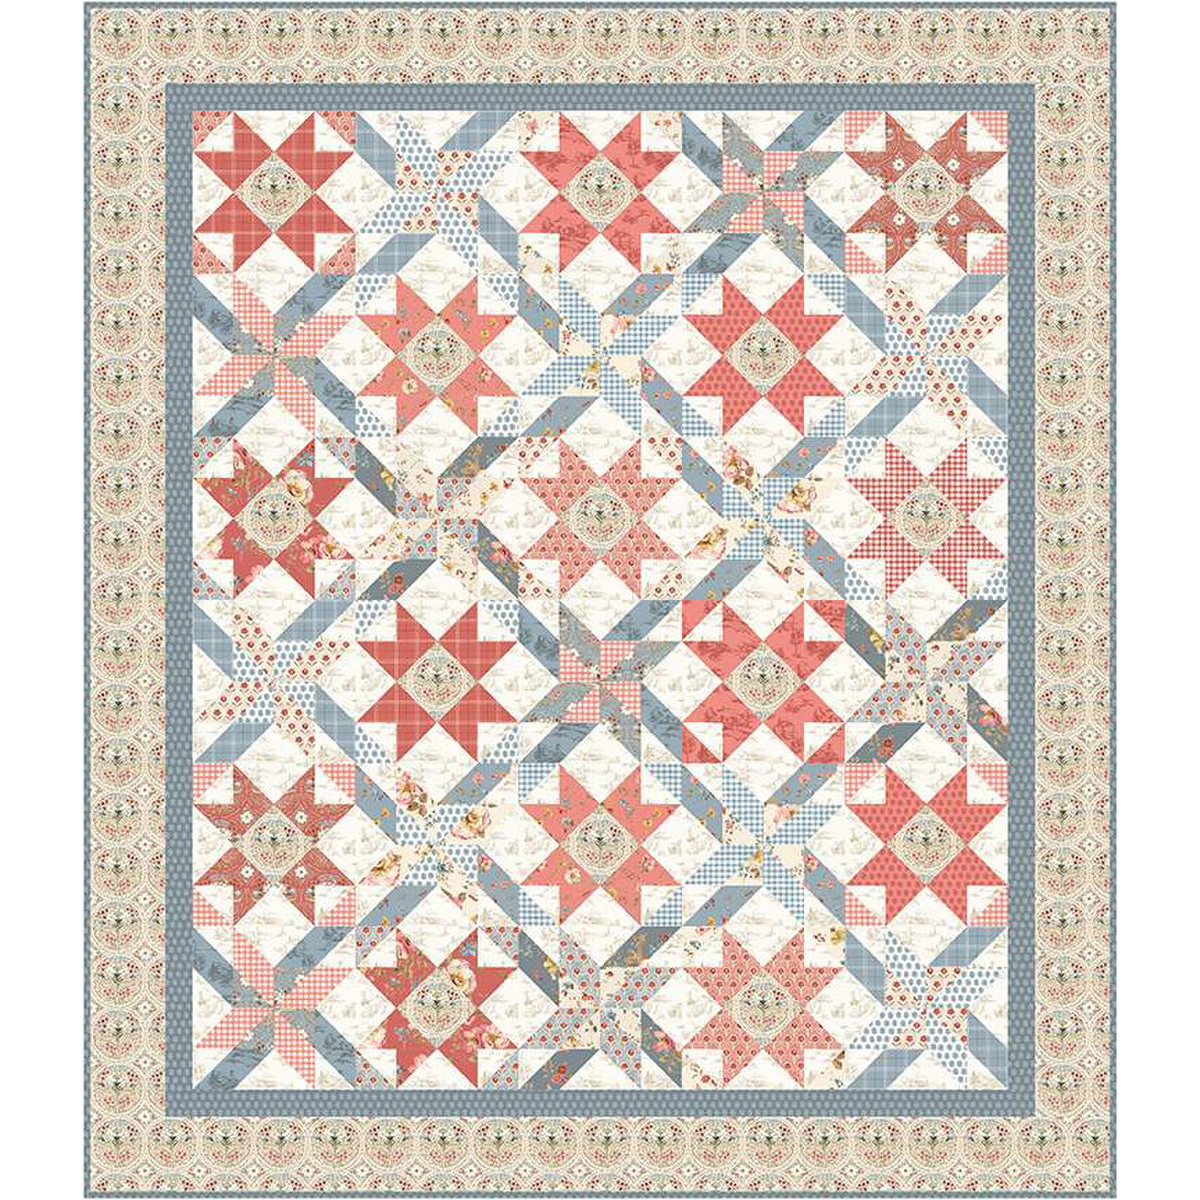 Countryside Shine On Quilt Kit